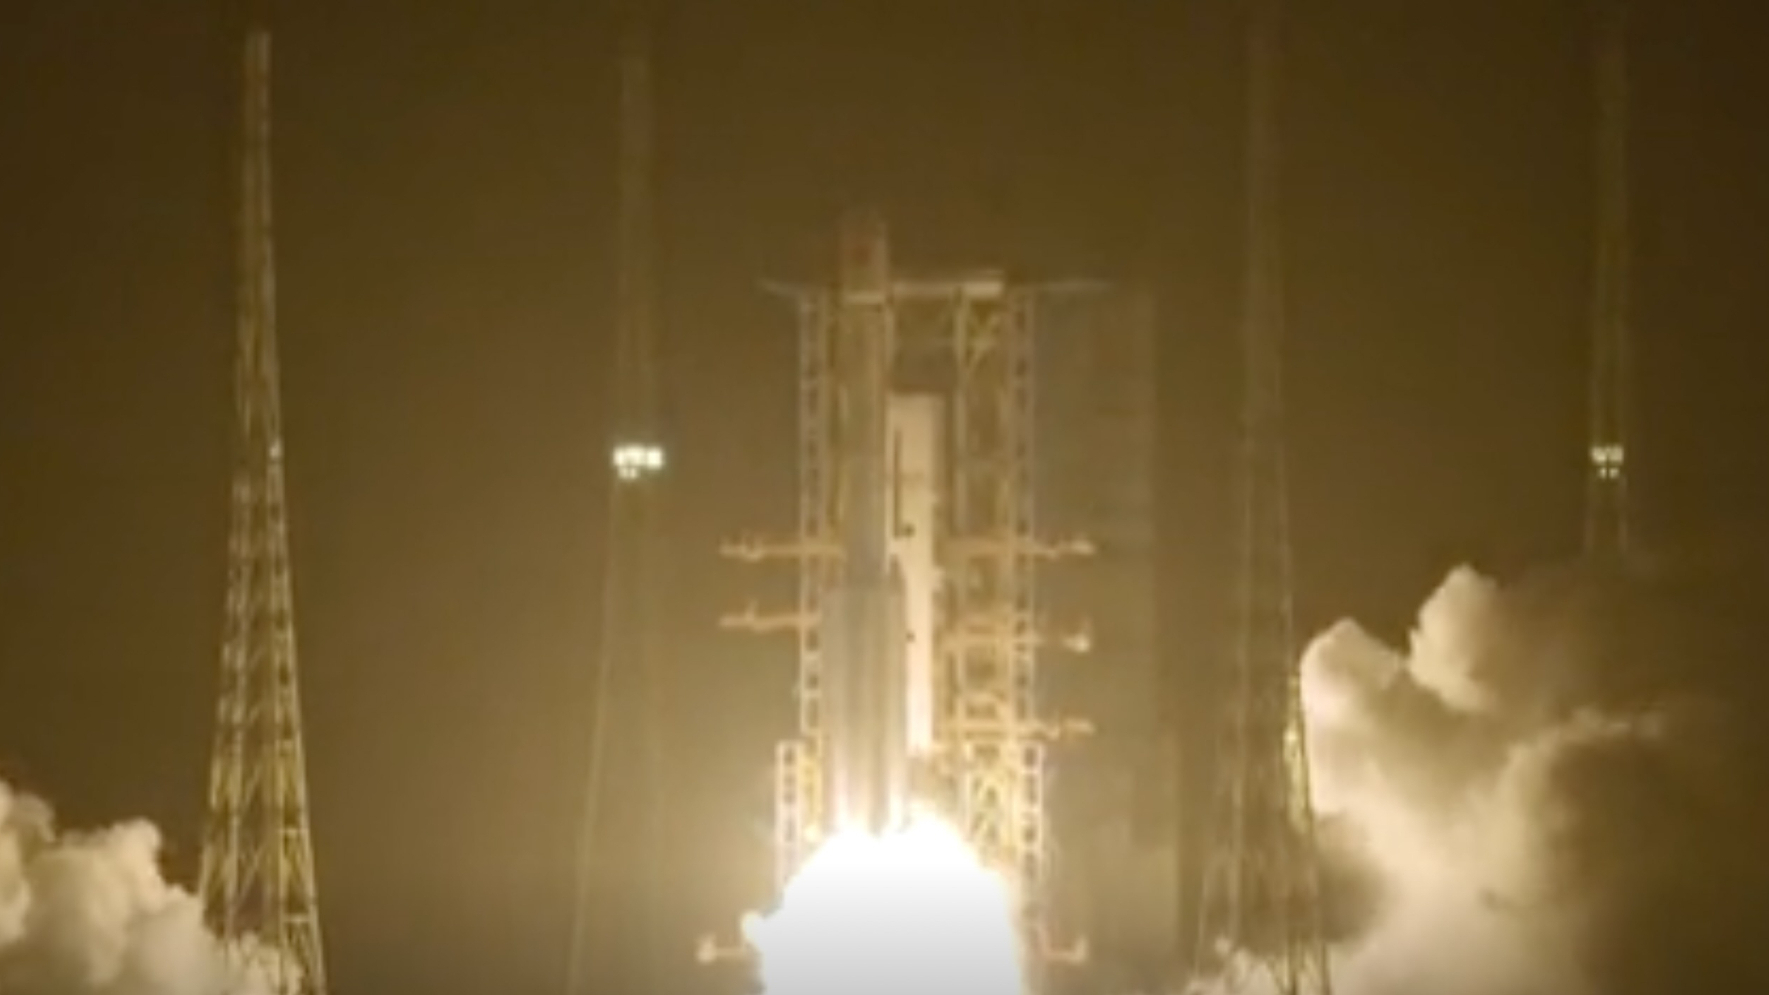 NASA Space Technology a white rocket launches into a night sky